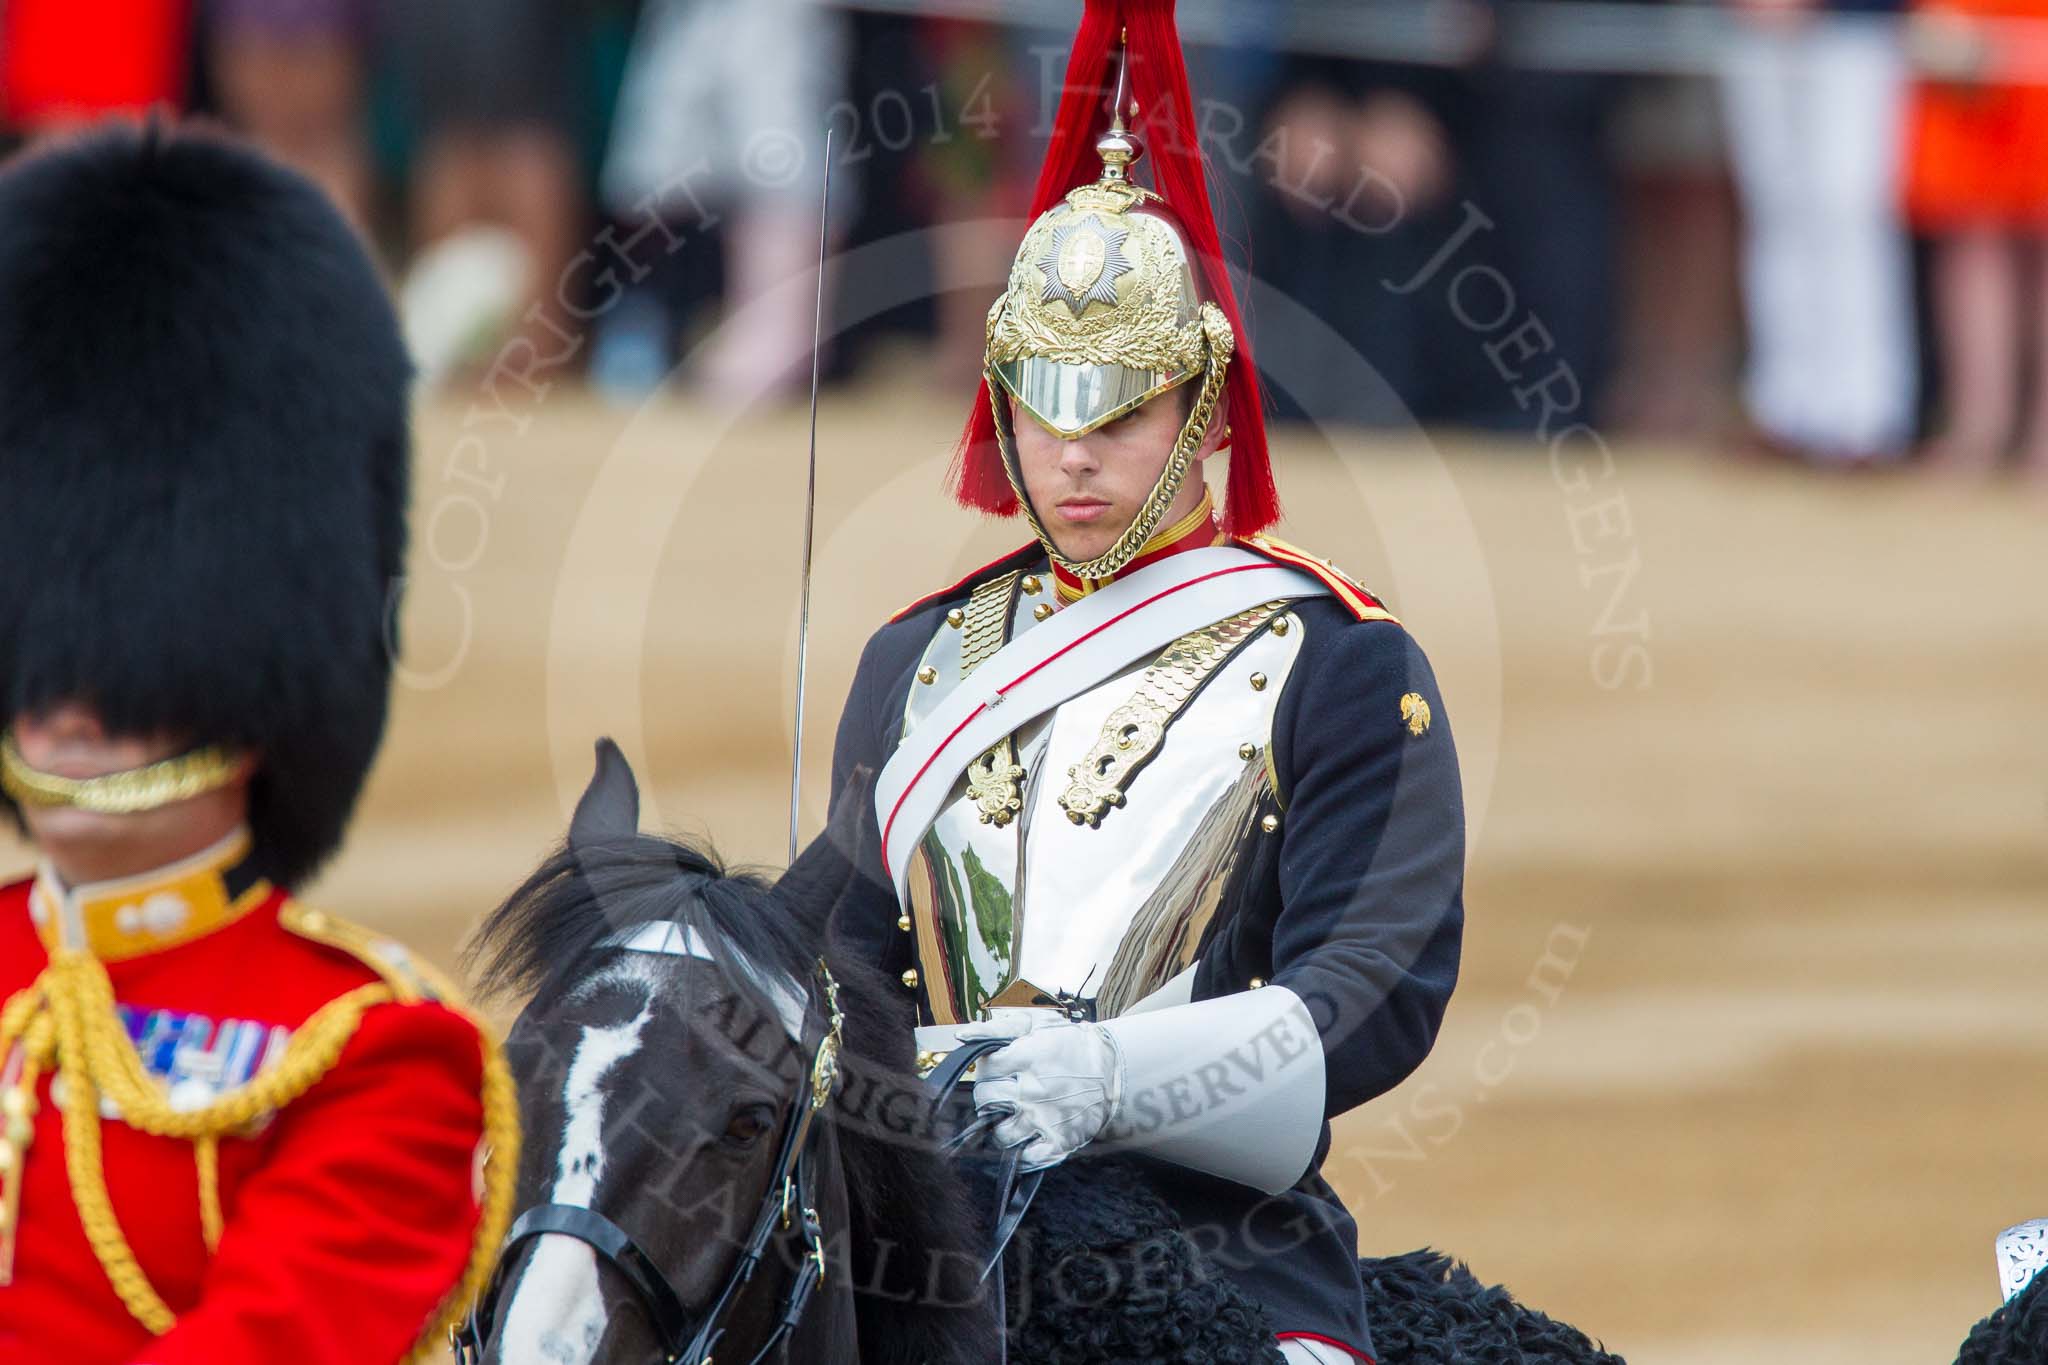 Trooping the Colour 2014.
Horse Guards Parade, Westminster,
London SW1A,

United Kingdom,
on 14 June 2014 at 10:57, image #325